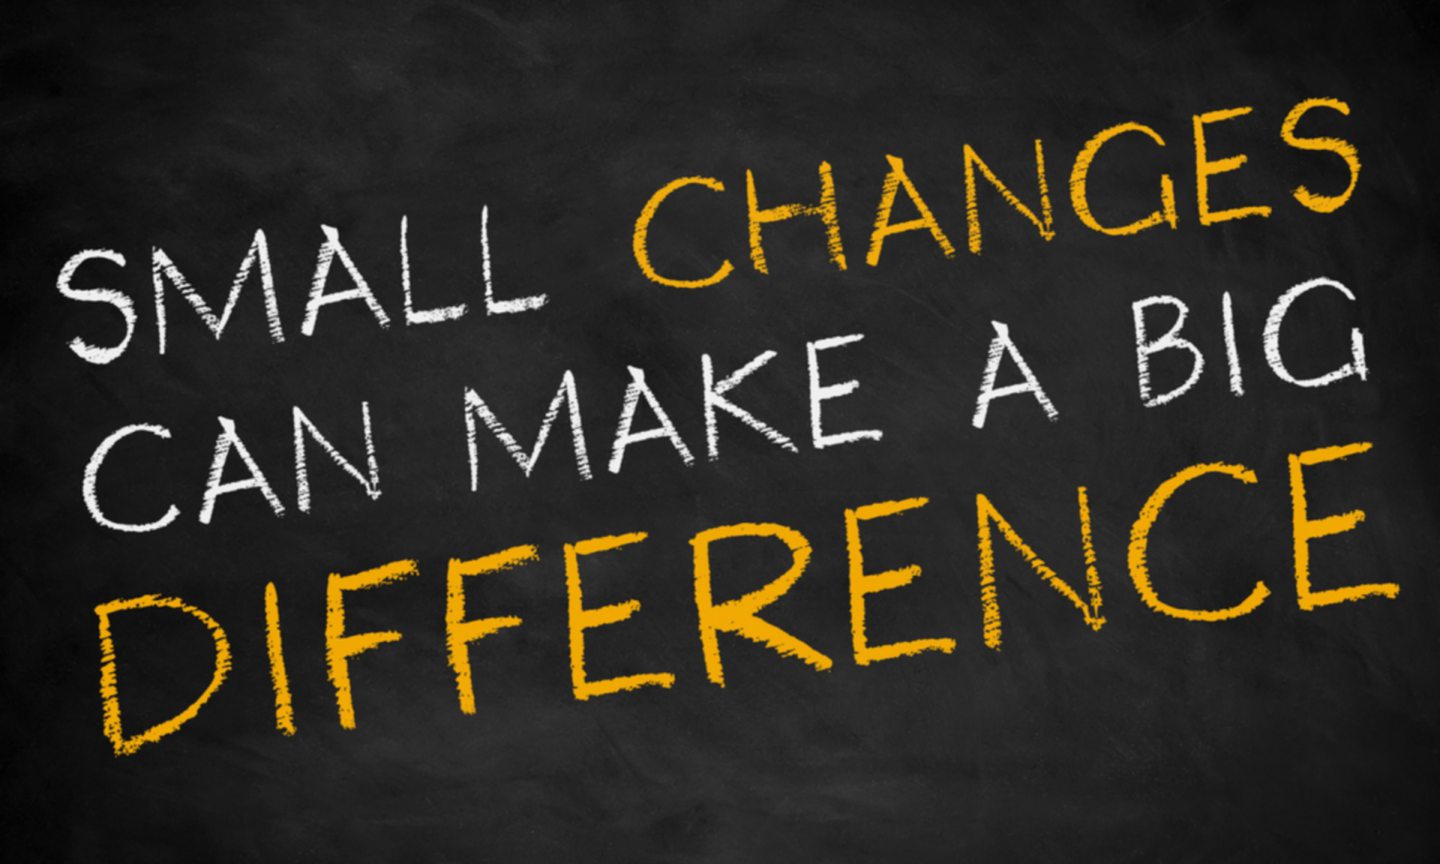 "Small changes can make a big difference"